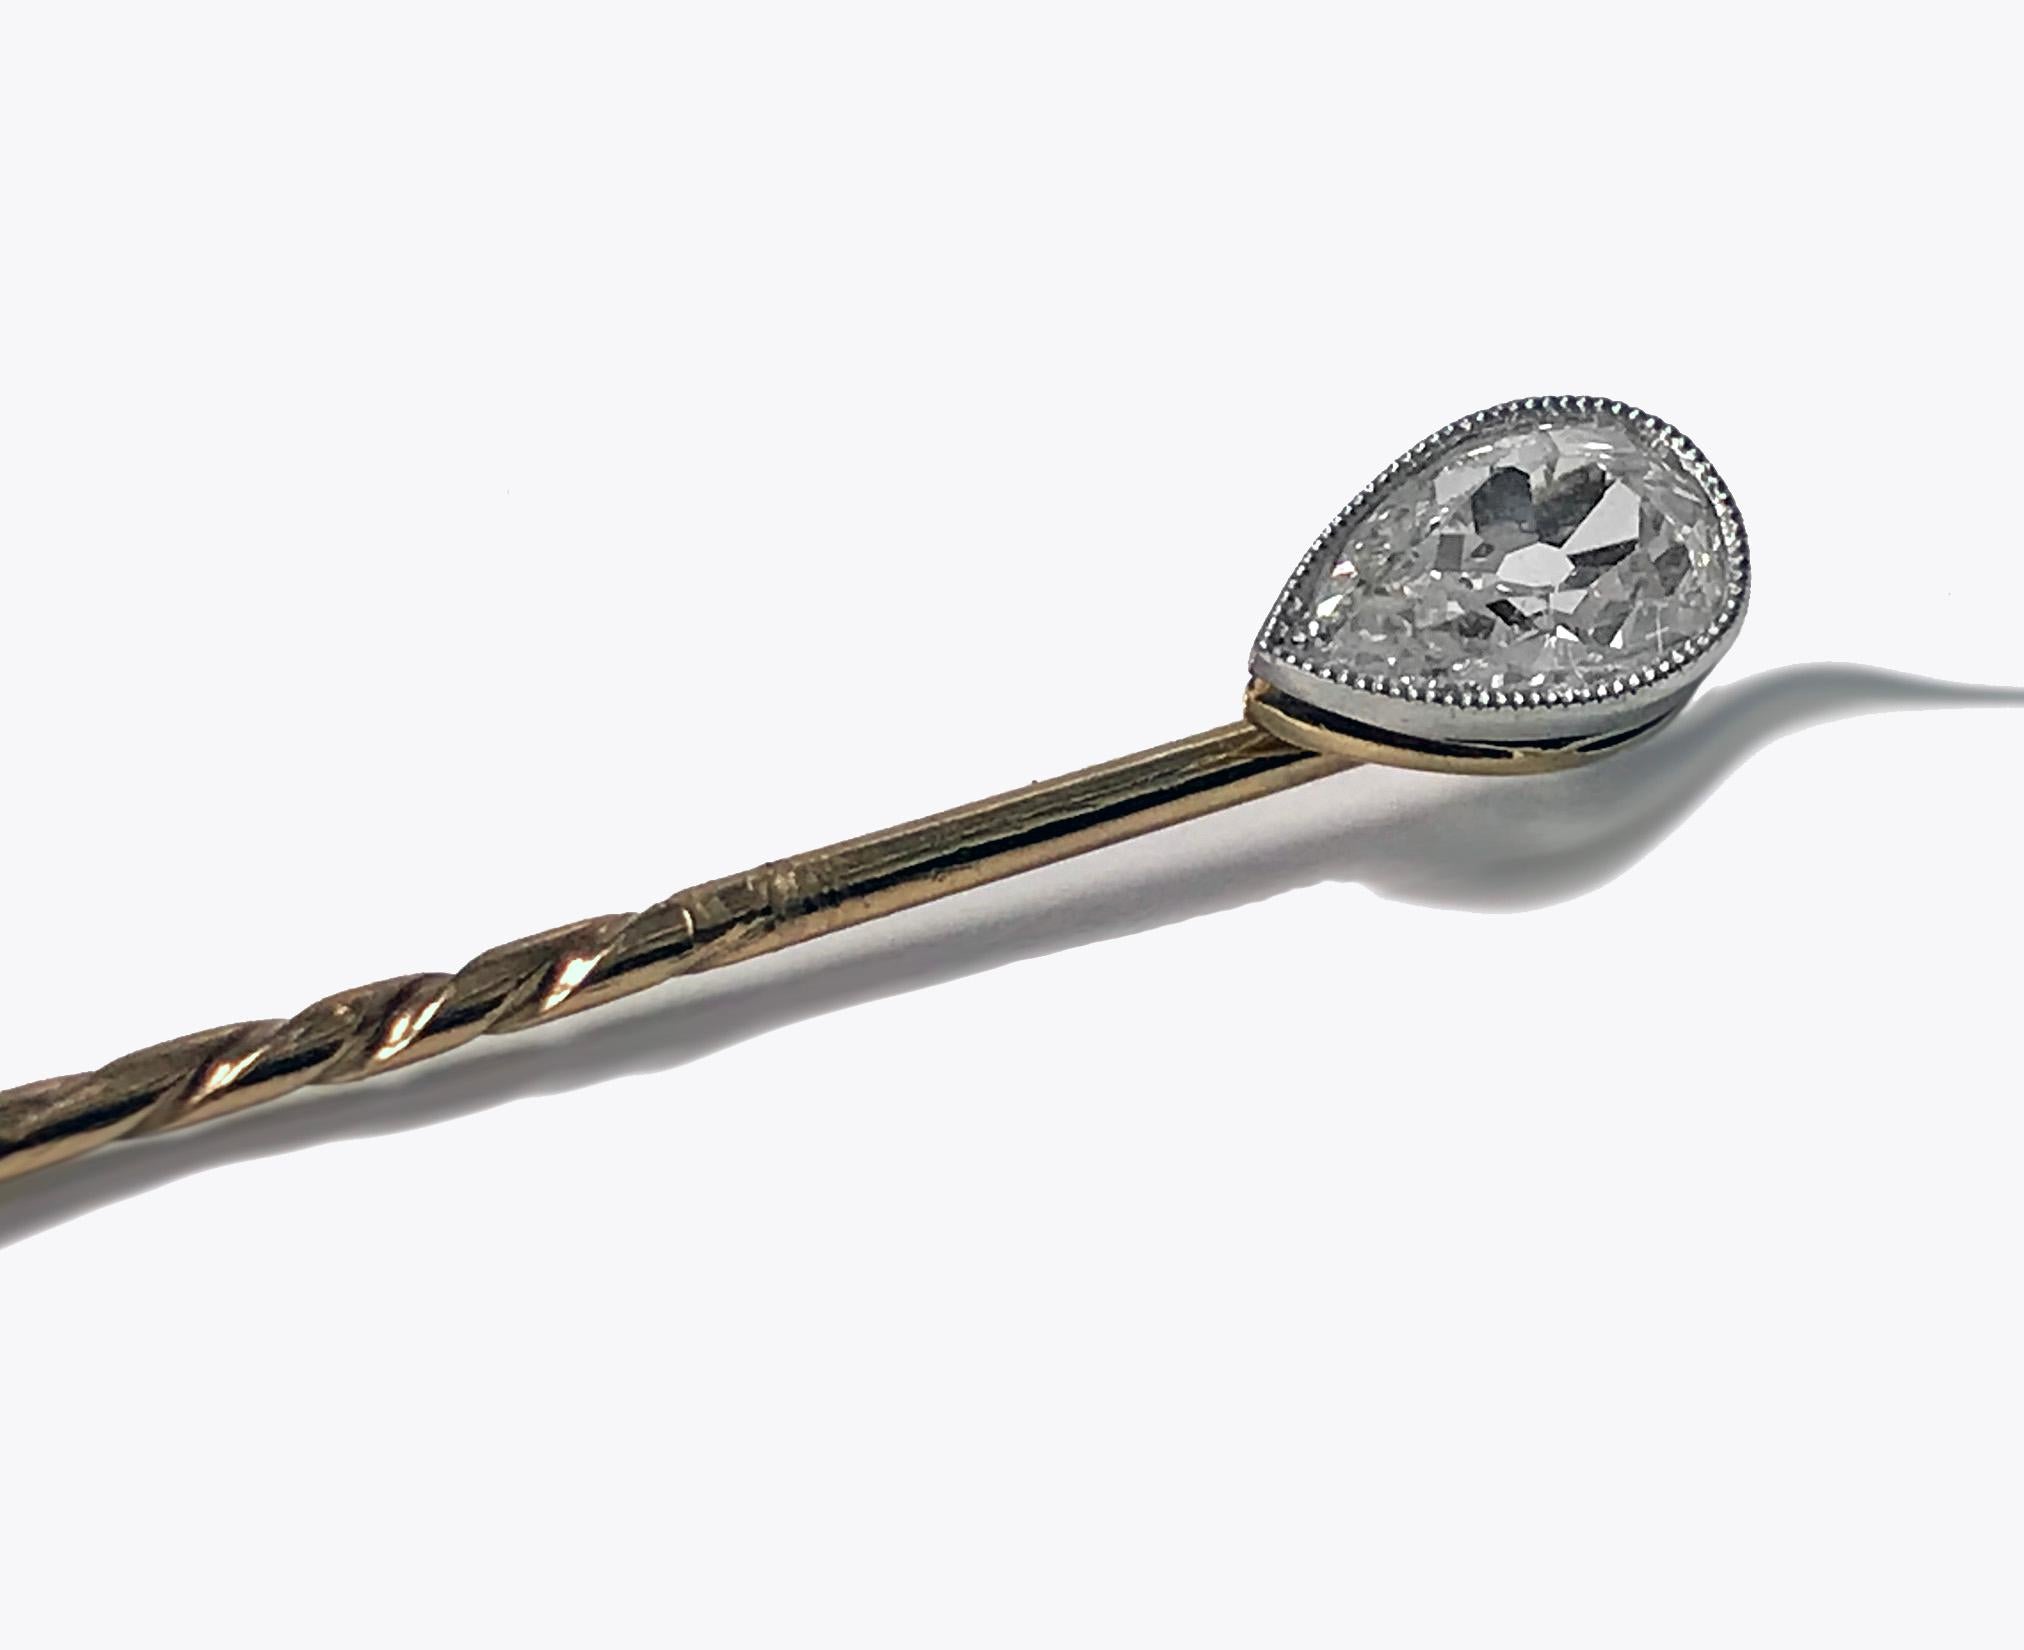 Antique diamond stickpin, circa 1910. The stickpin platinum milligrain set with an old pear cut diamond, approximately 0.50-carat, approximately SI clarity, approximately I-J color, split gallery mount, plain pin. Length: 2 inches. Total item